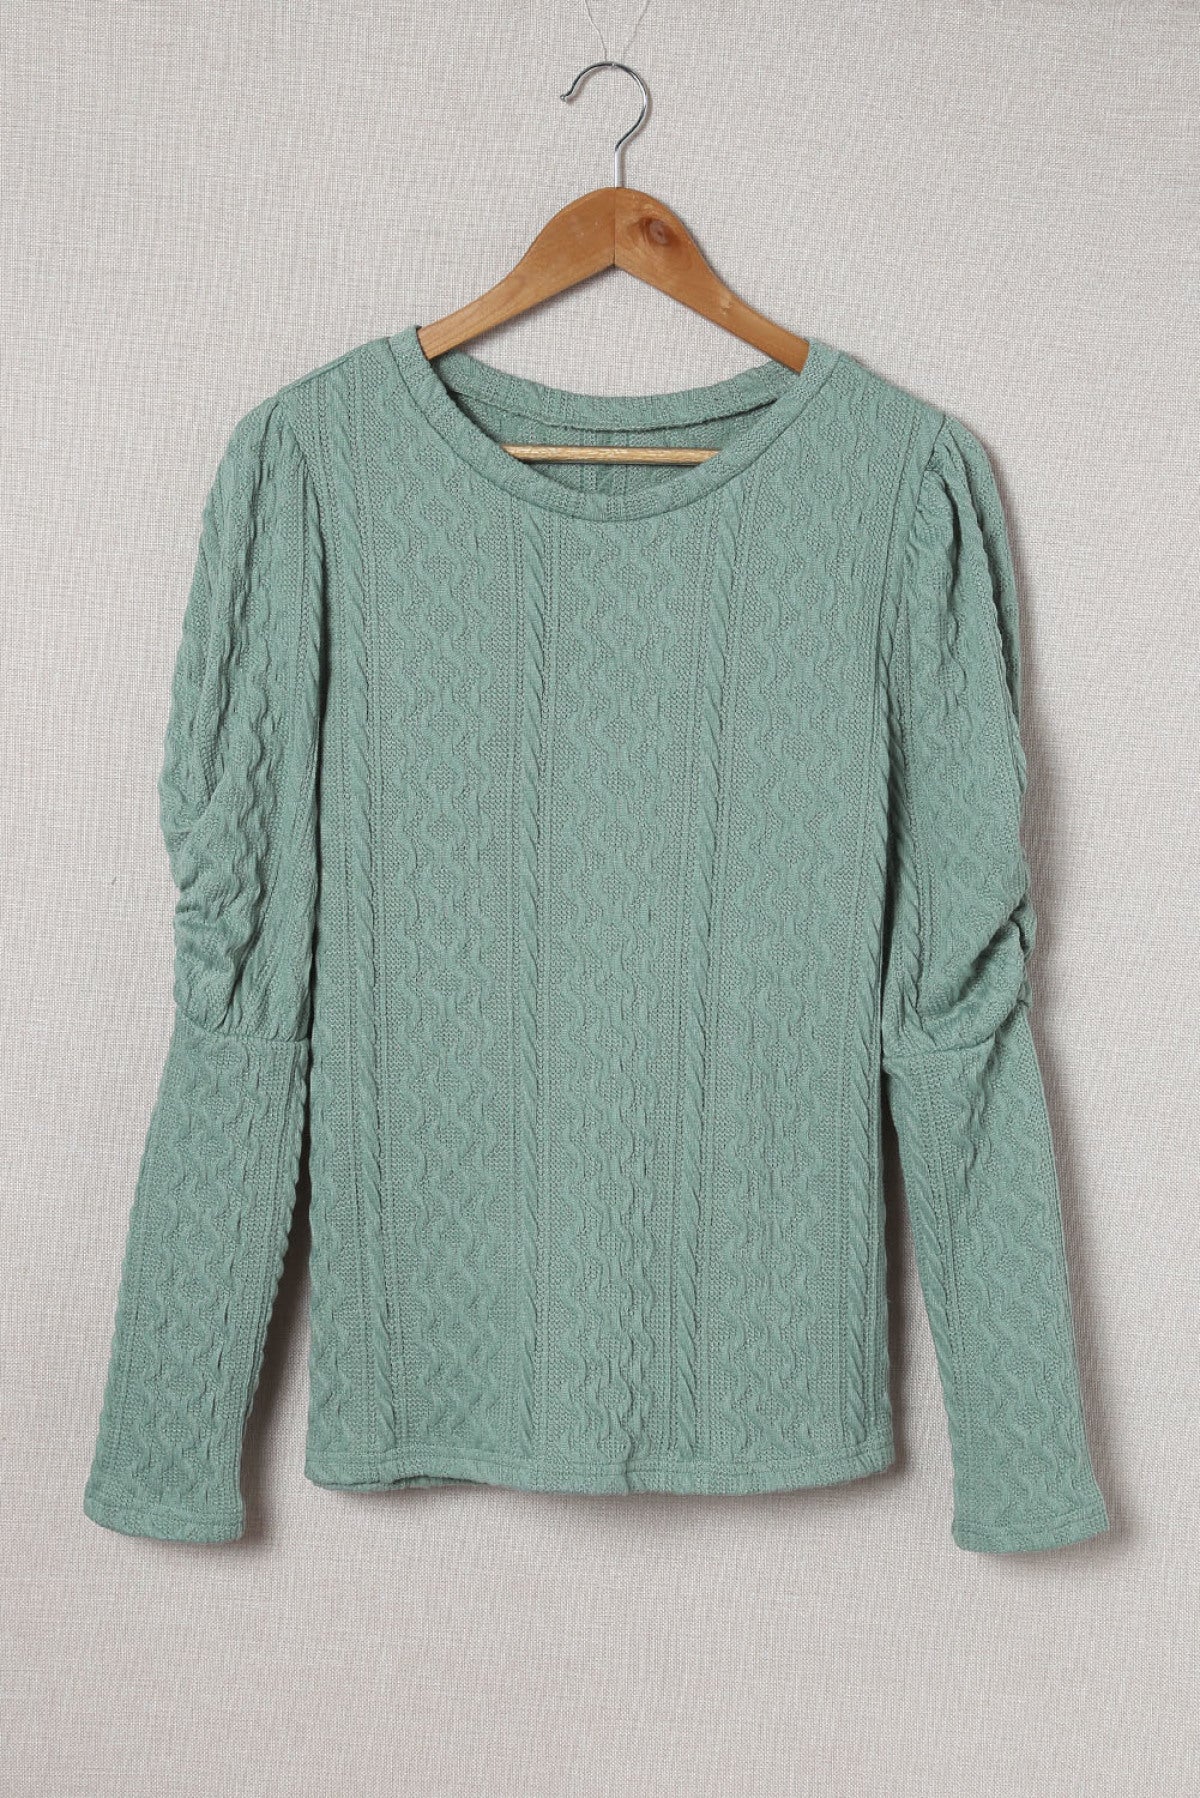 Solid Color Puffy Sleeve Textured Knit Top - Passion of Essence Boutique